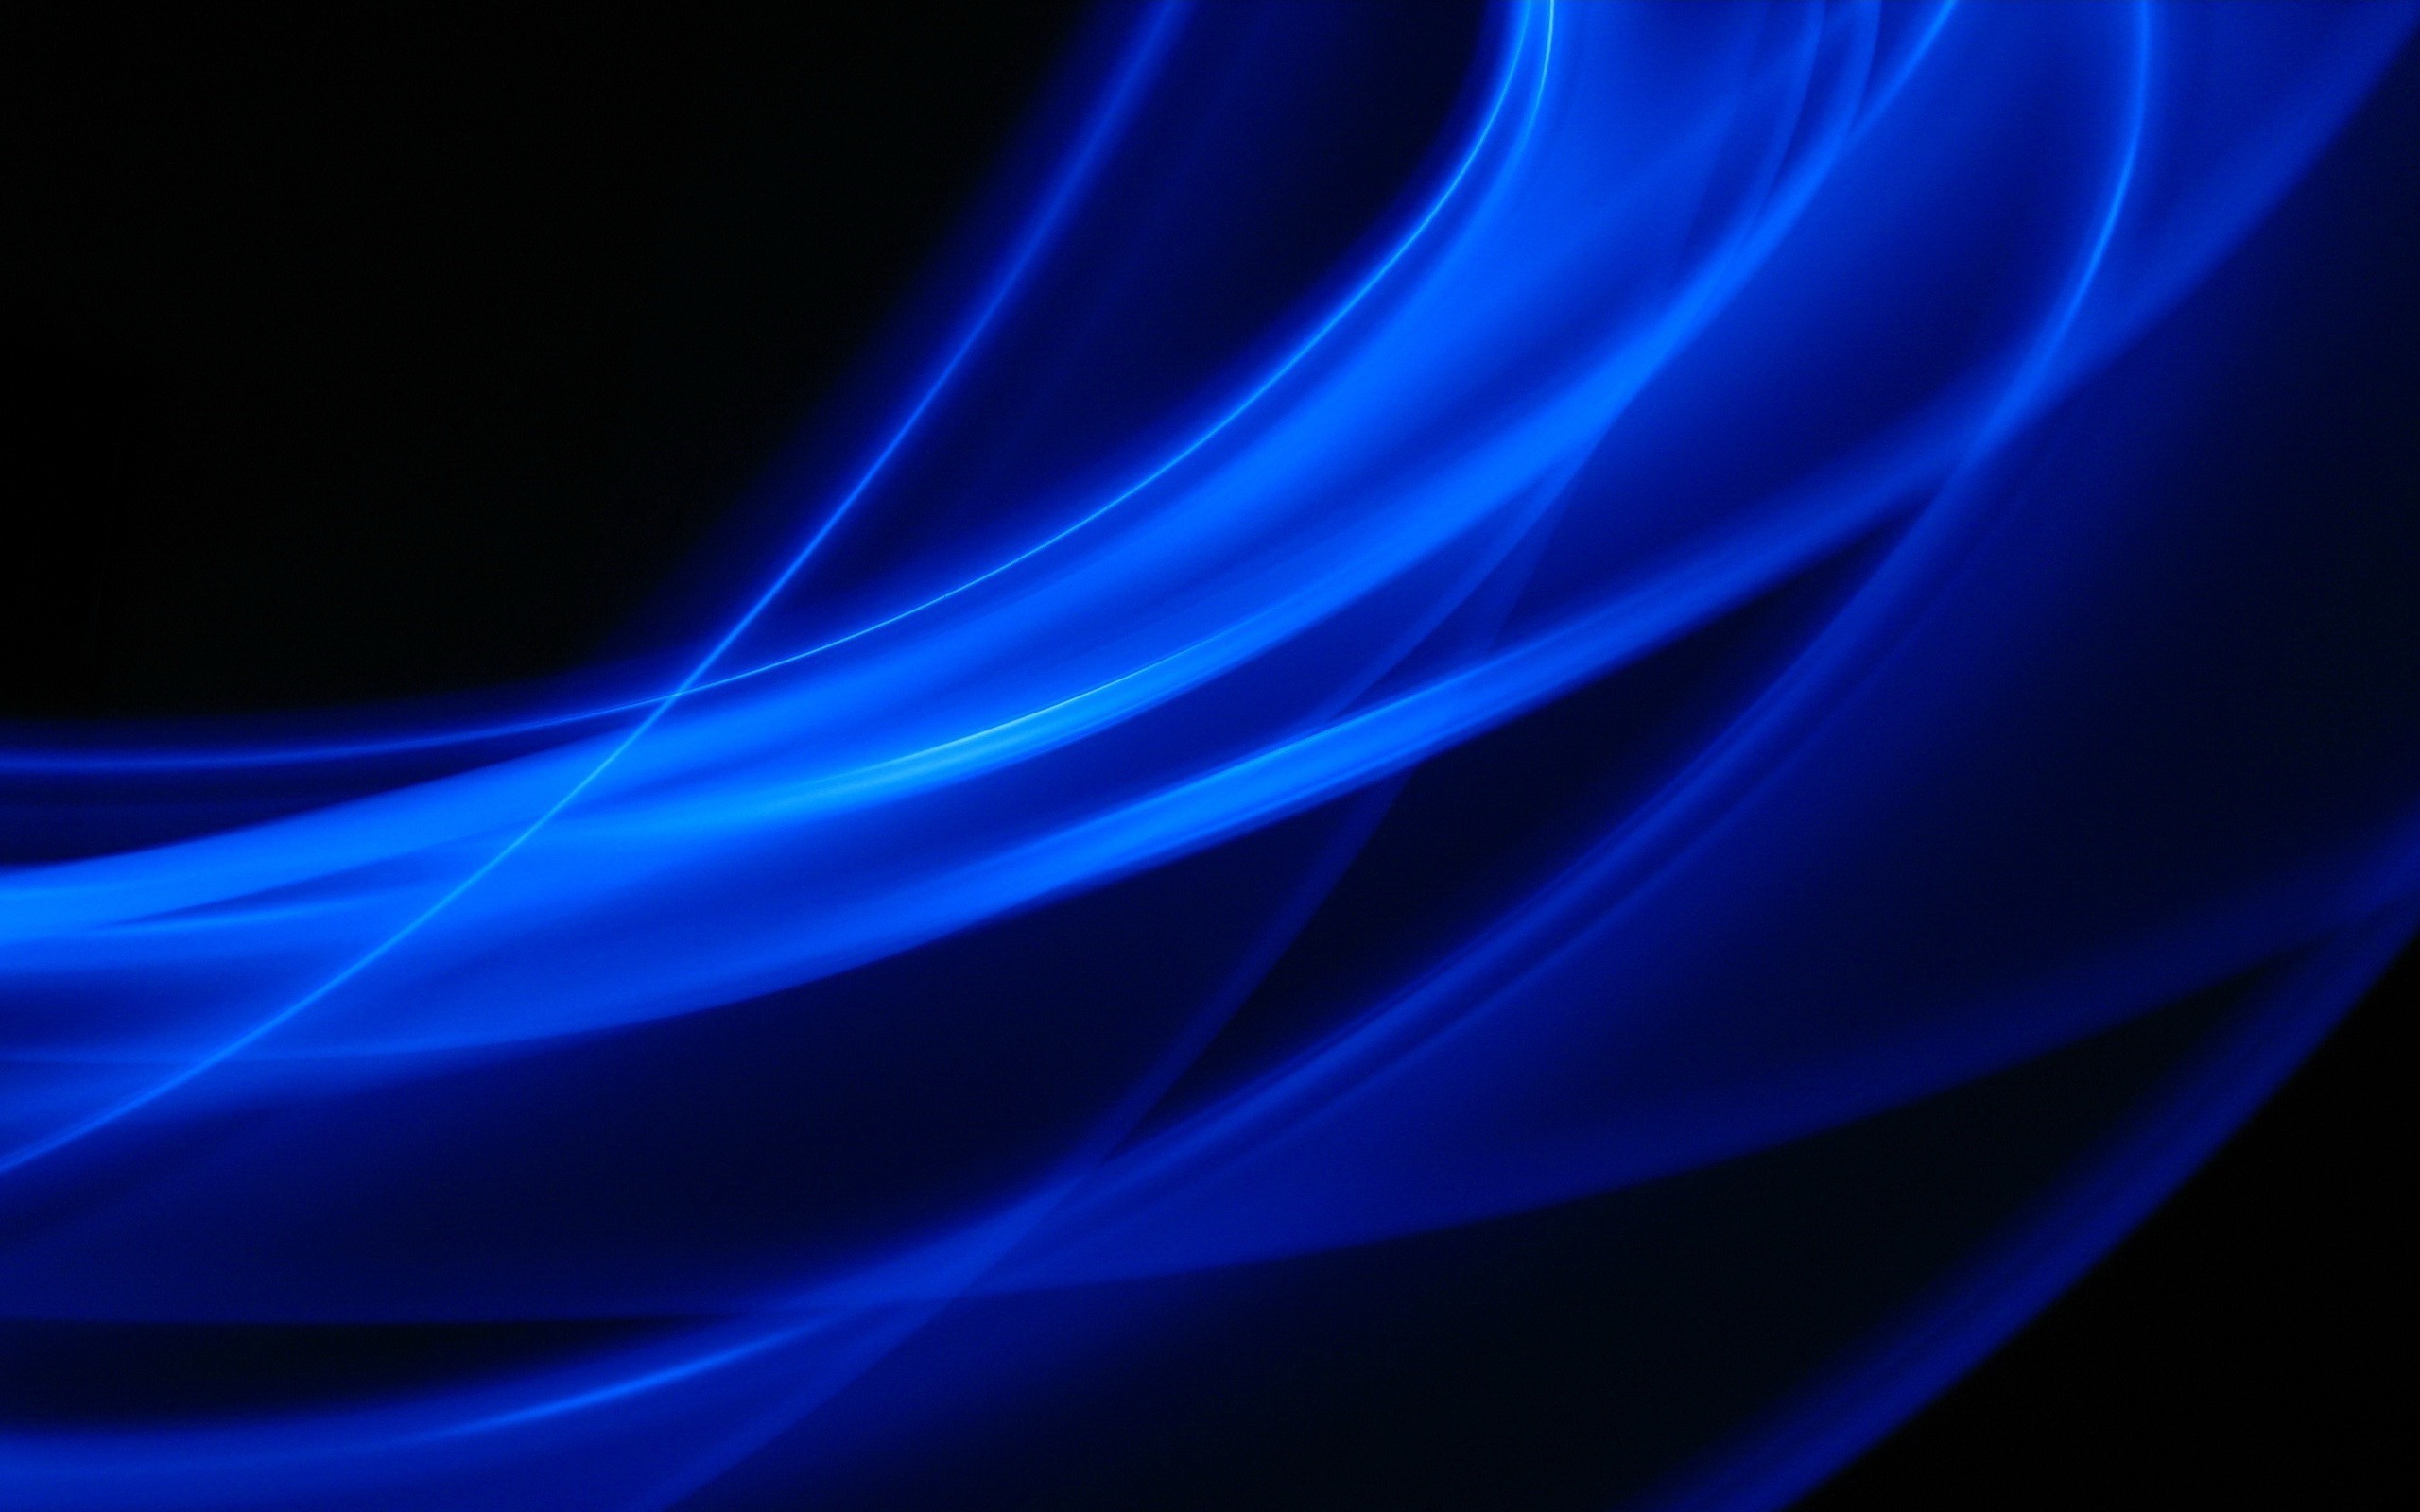 Blue Abstract Windows 81 Wallpapers All for Windows 10 2560x1600